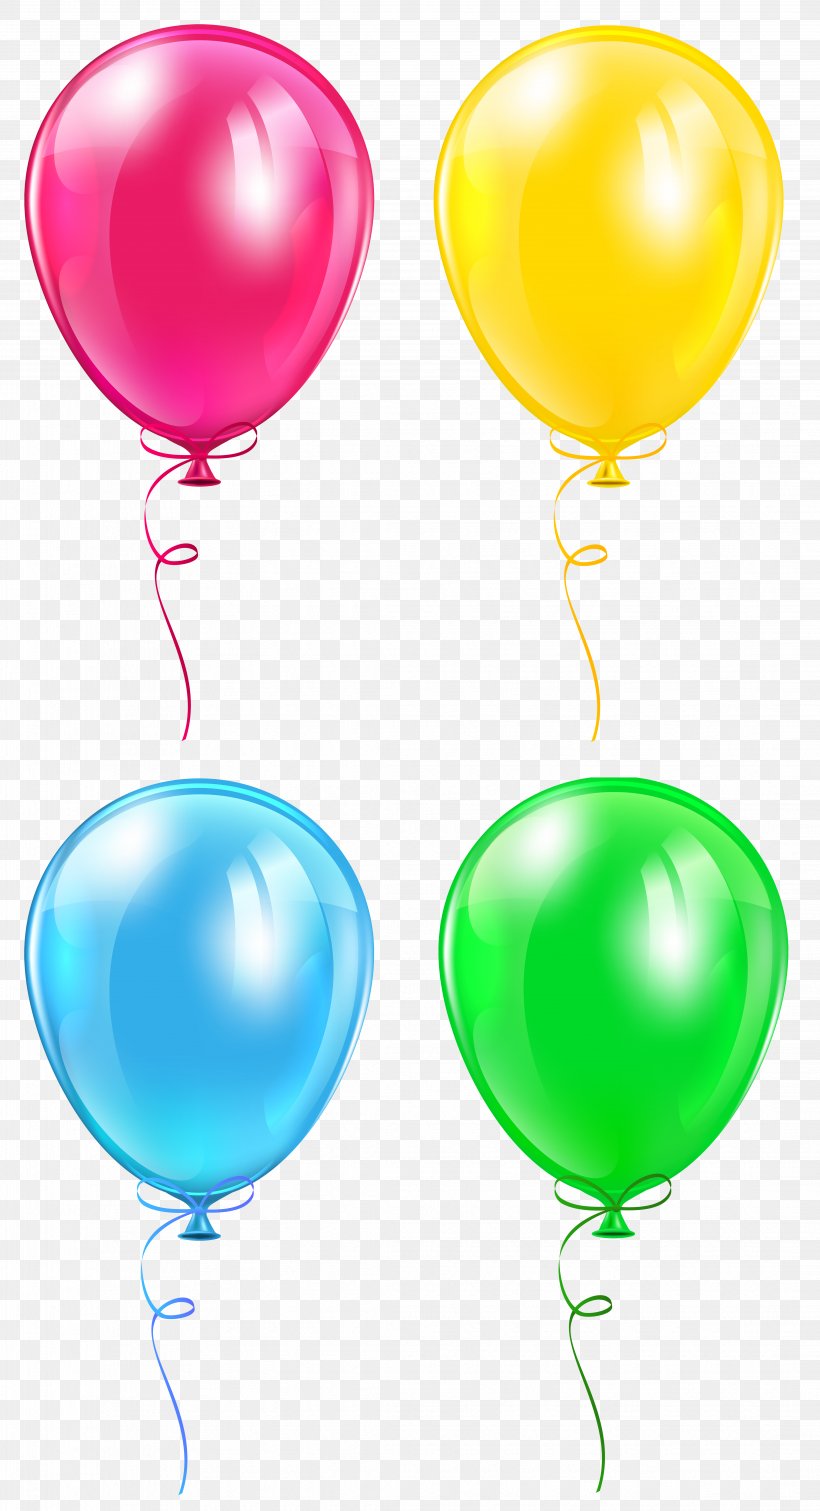 Image File Formats Lossless Compression, PNG, 4341x8000px, Balloon, Birthday, Color, Computer Software, Party Supply Download Free